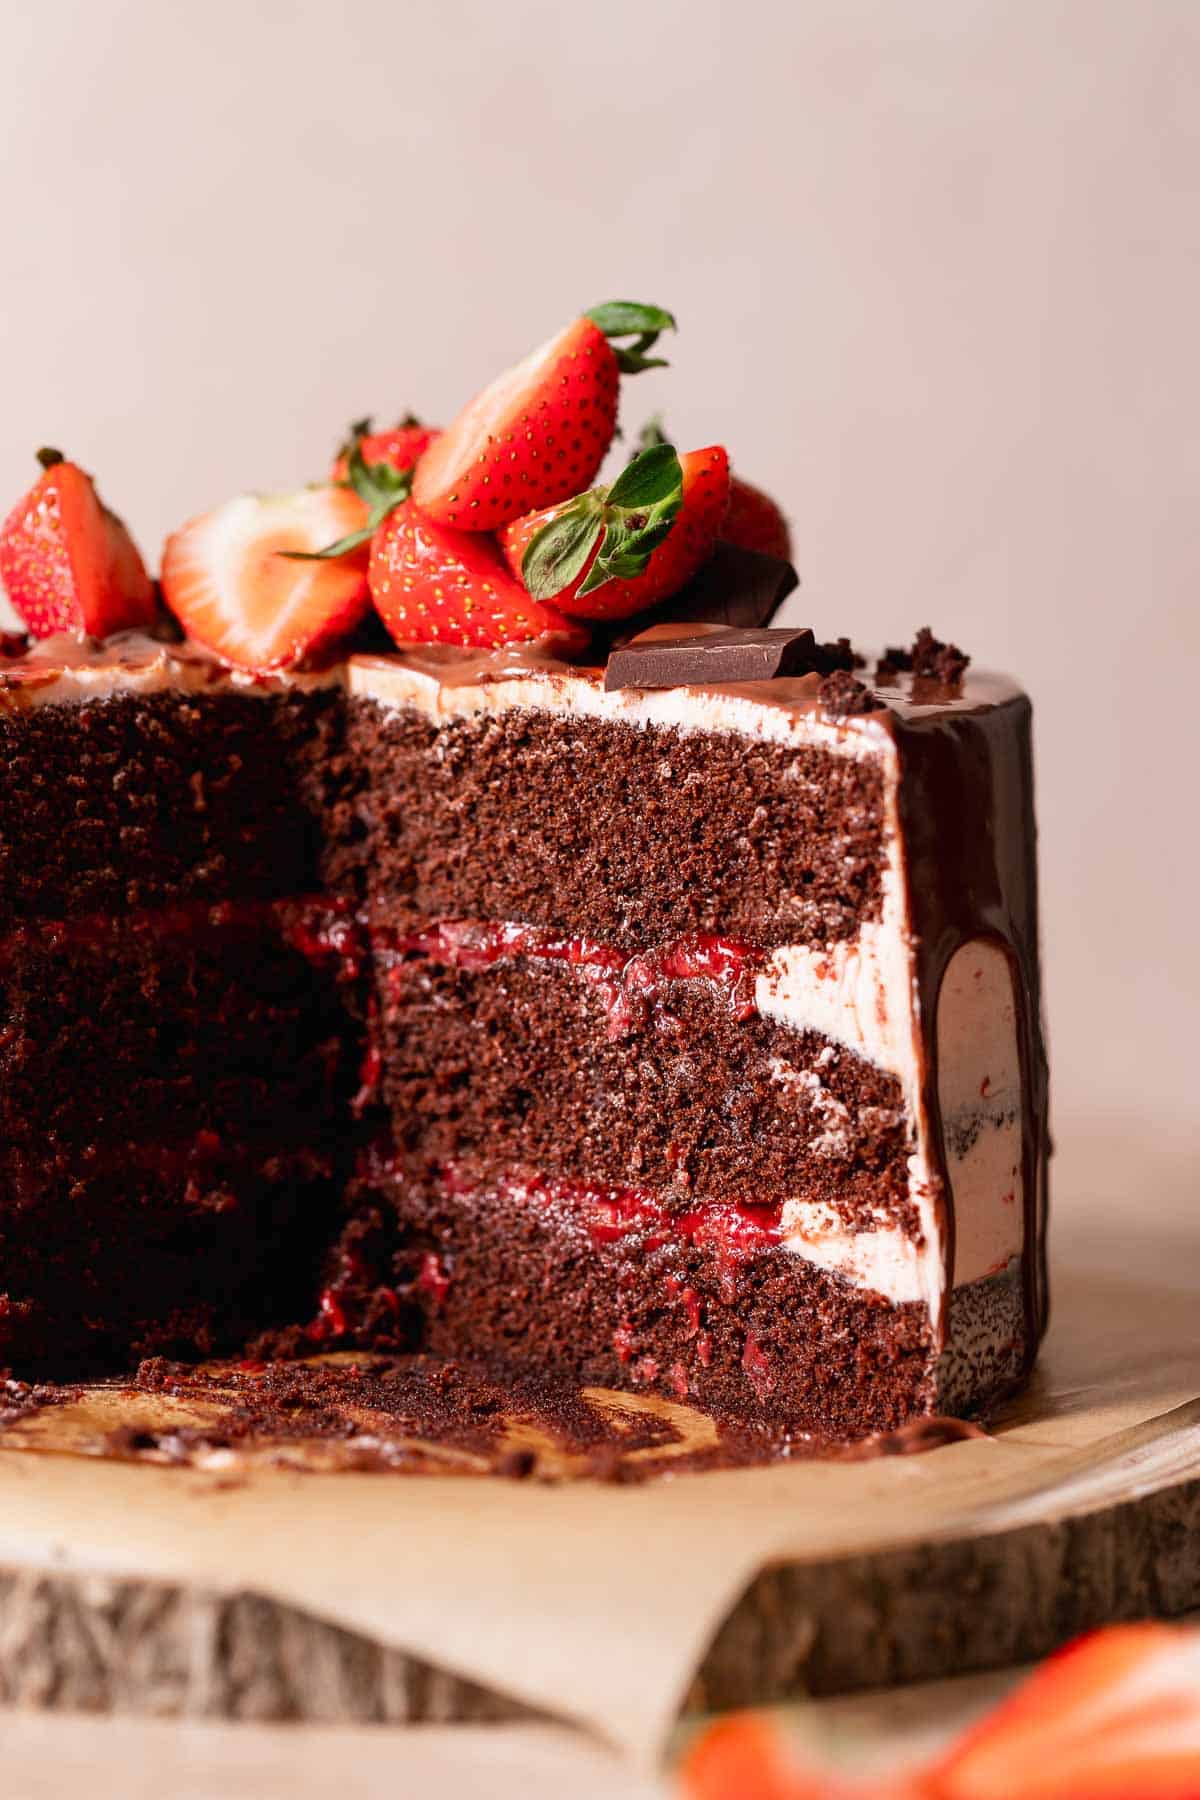 Chocolate cake with strawberry filling cut in half to show the layers.